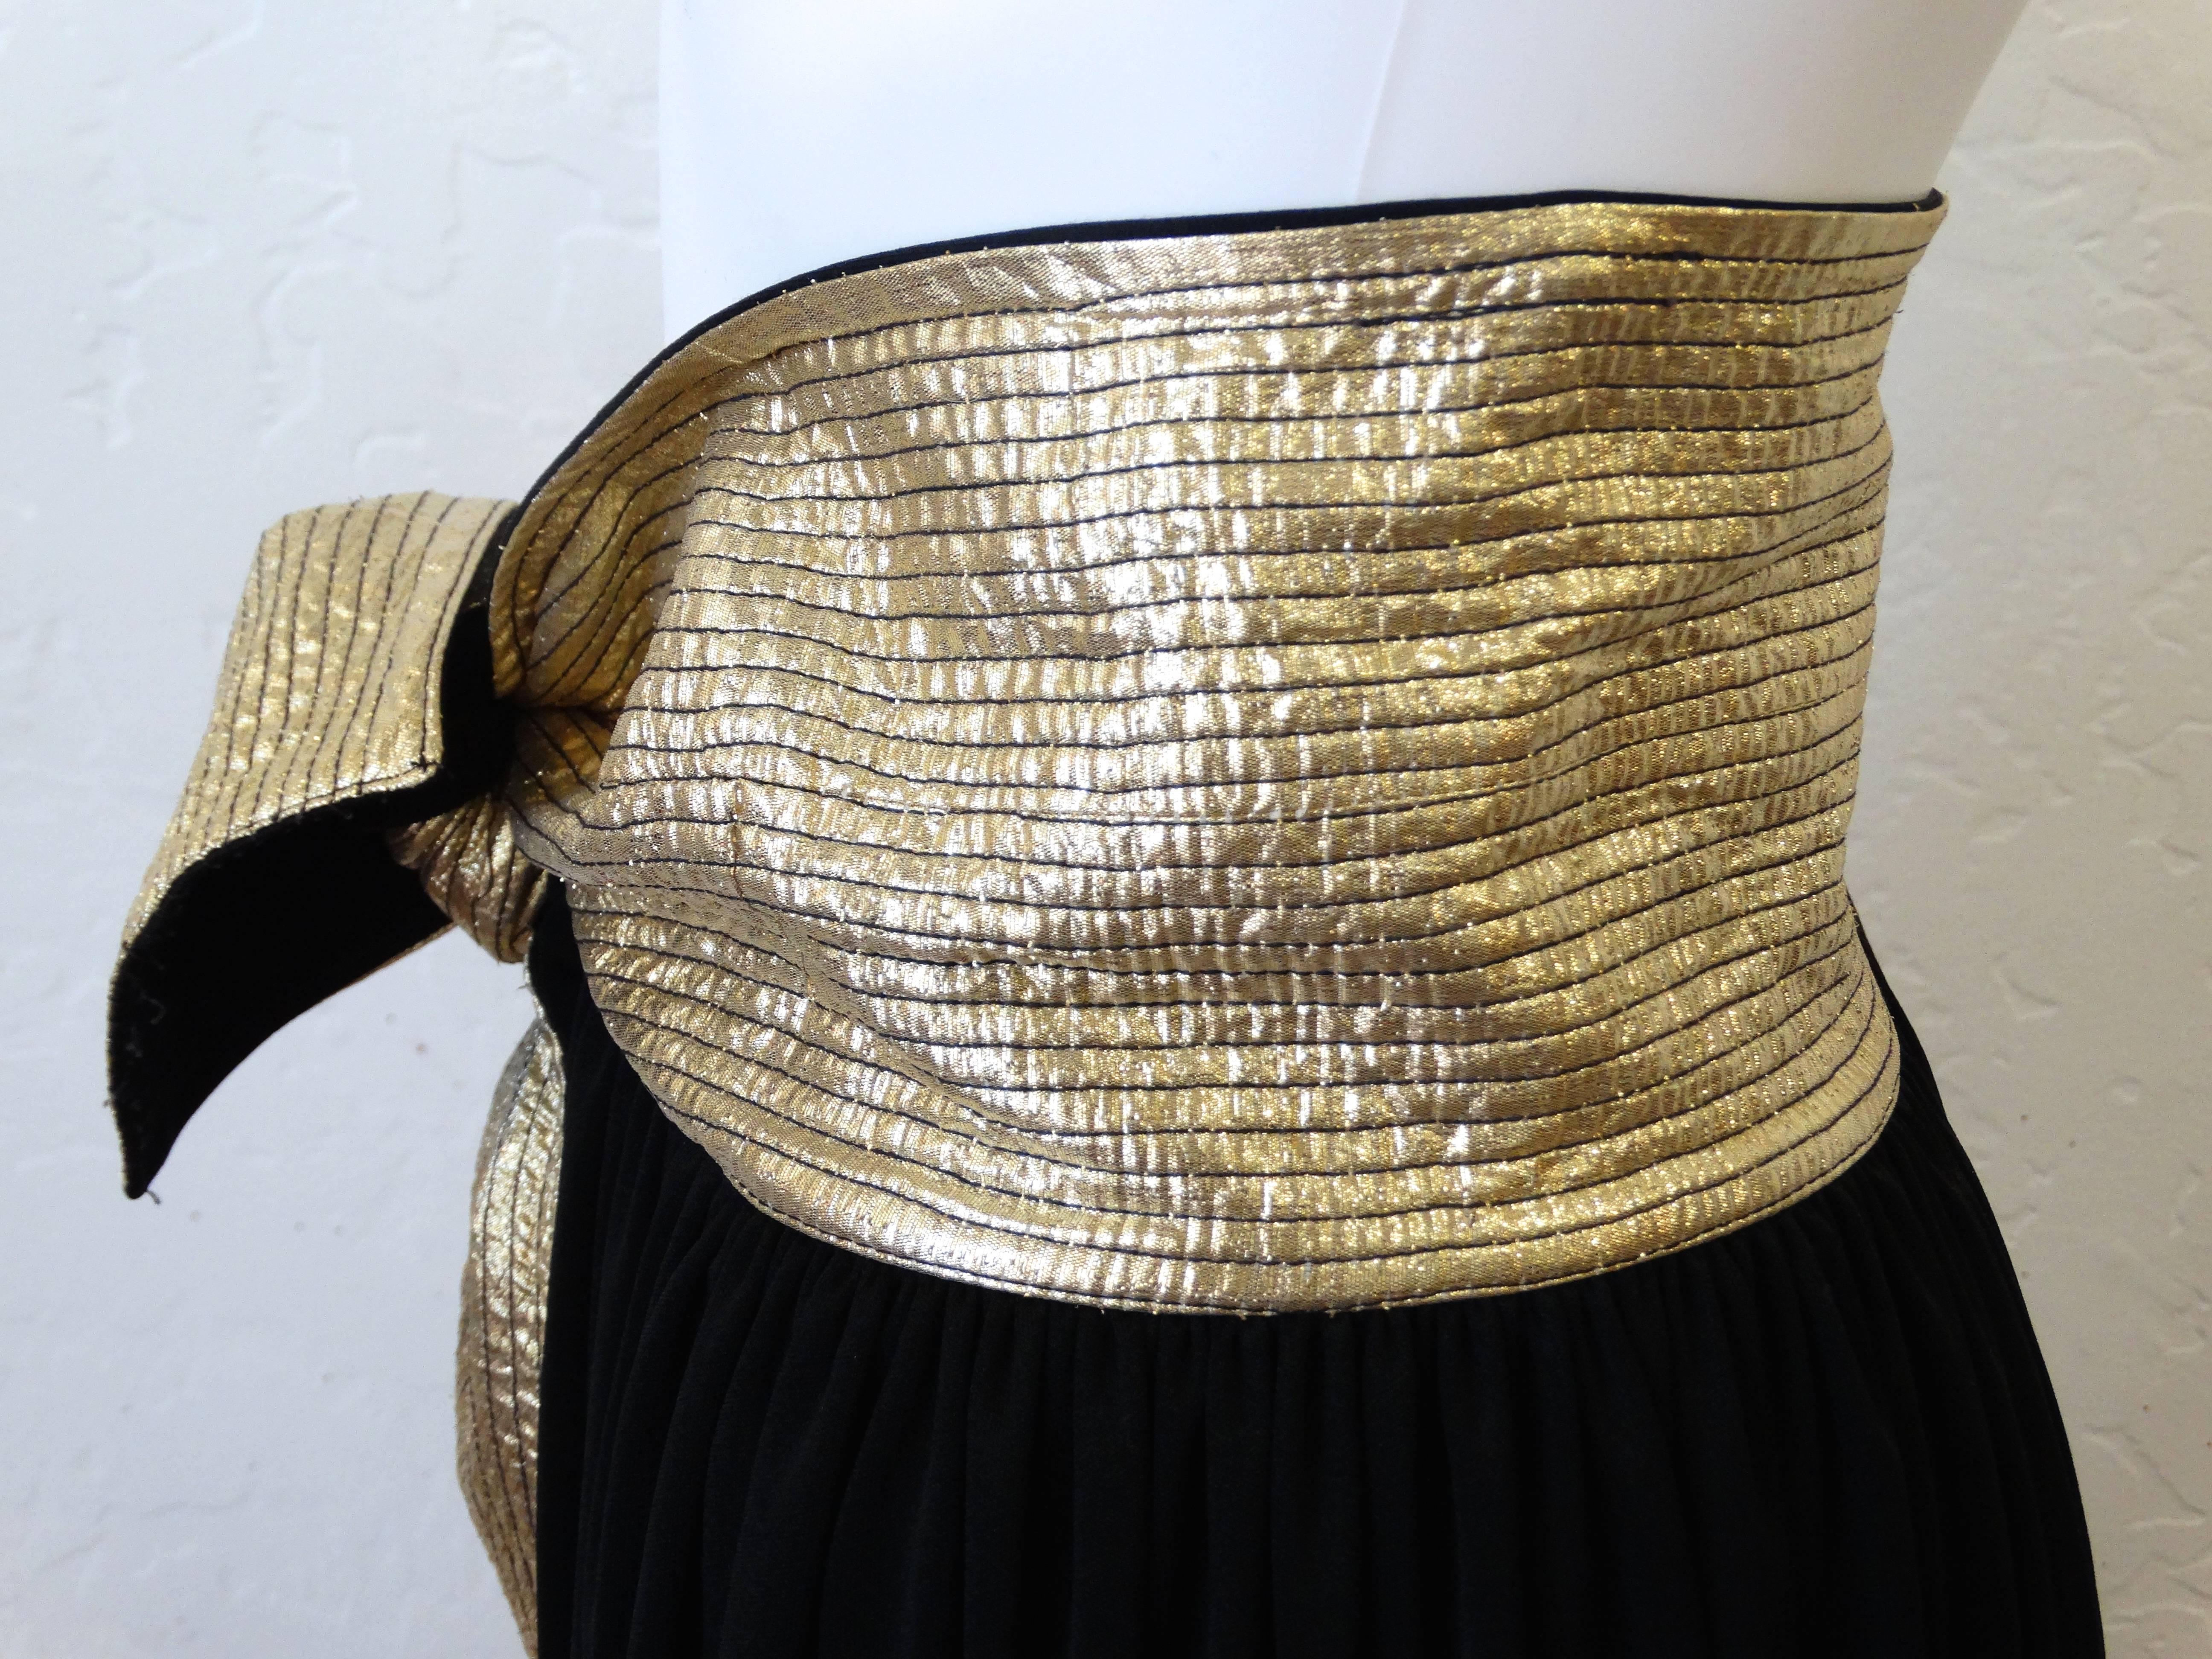 A great staple to add to your wardrobe is this classic maxi skirt with a twist! Designed by Bill Tice circa1980's. This long maxi has an attached gold metallic  leather thick sash belt. Super model length in great vintage condition. No size label